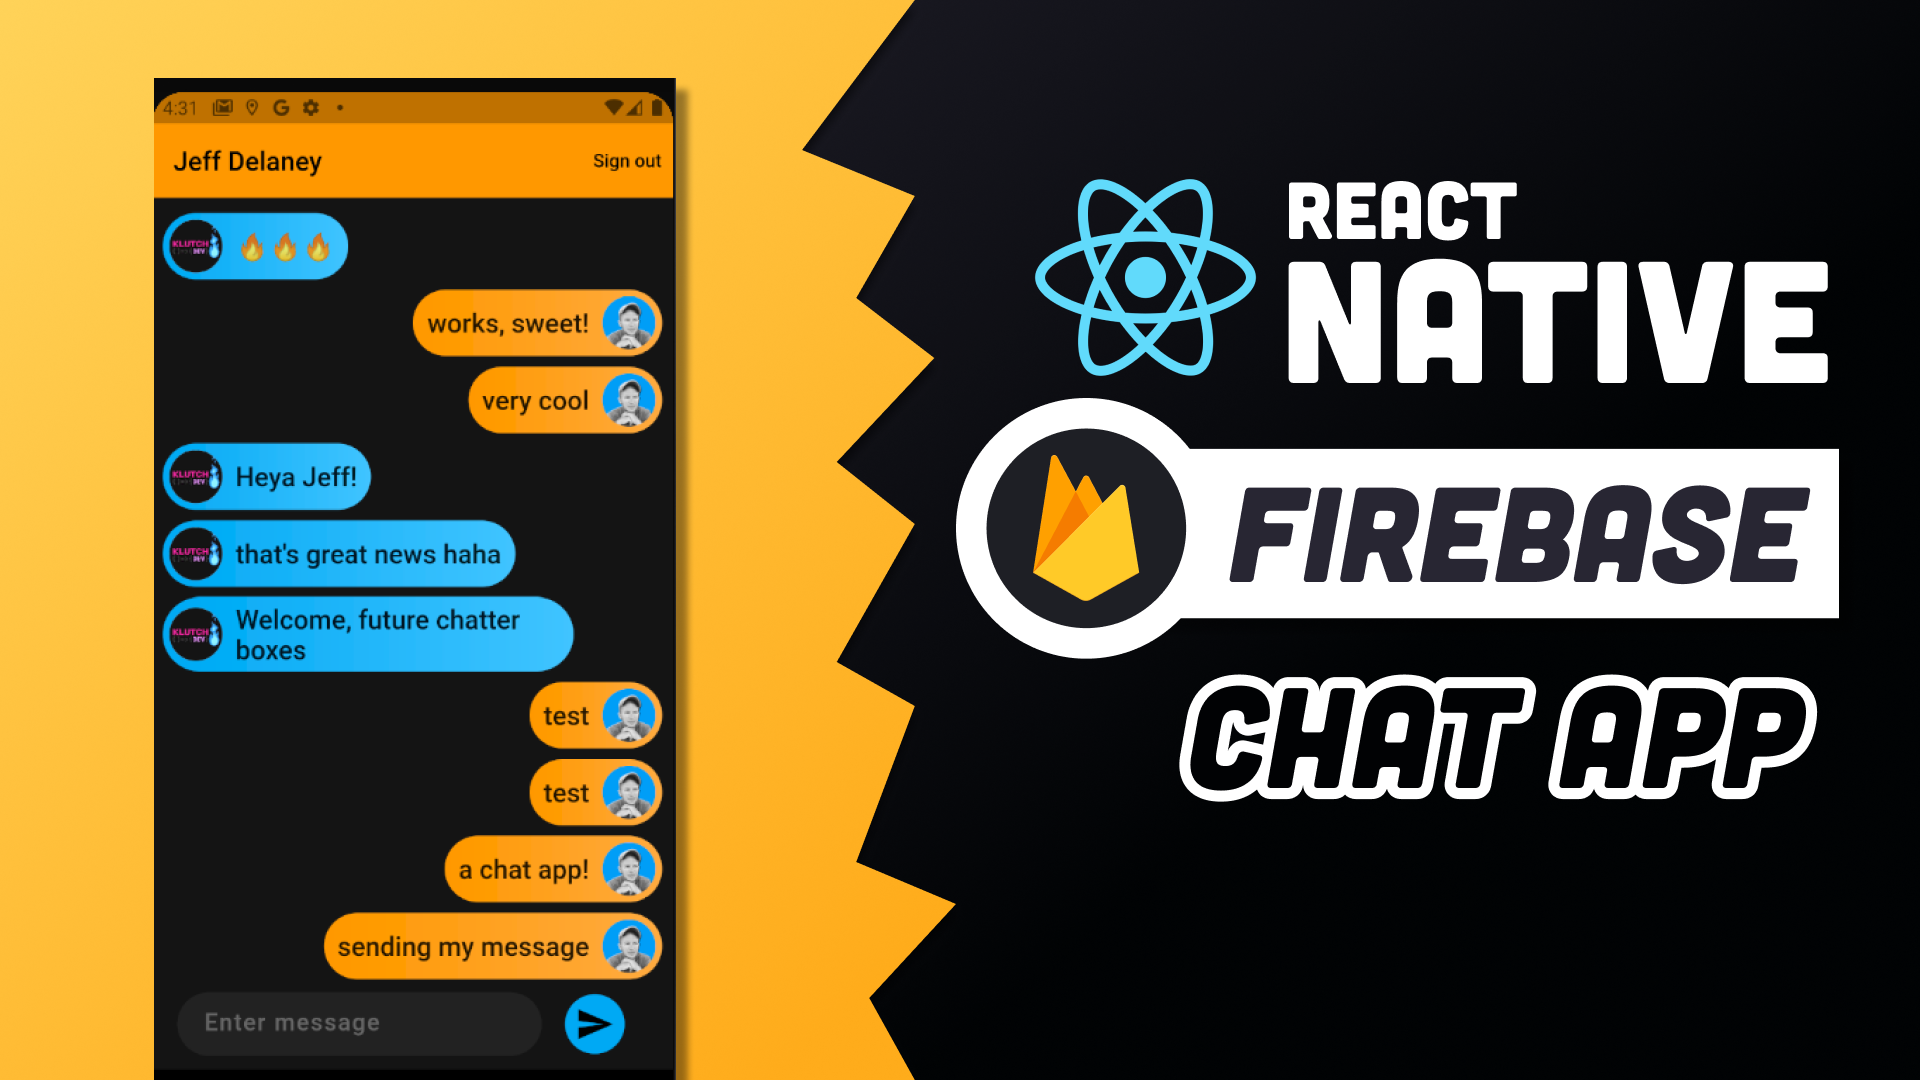 Firebase chat tutorial android group React Firebase